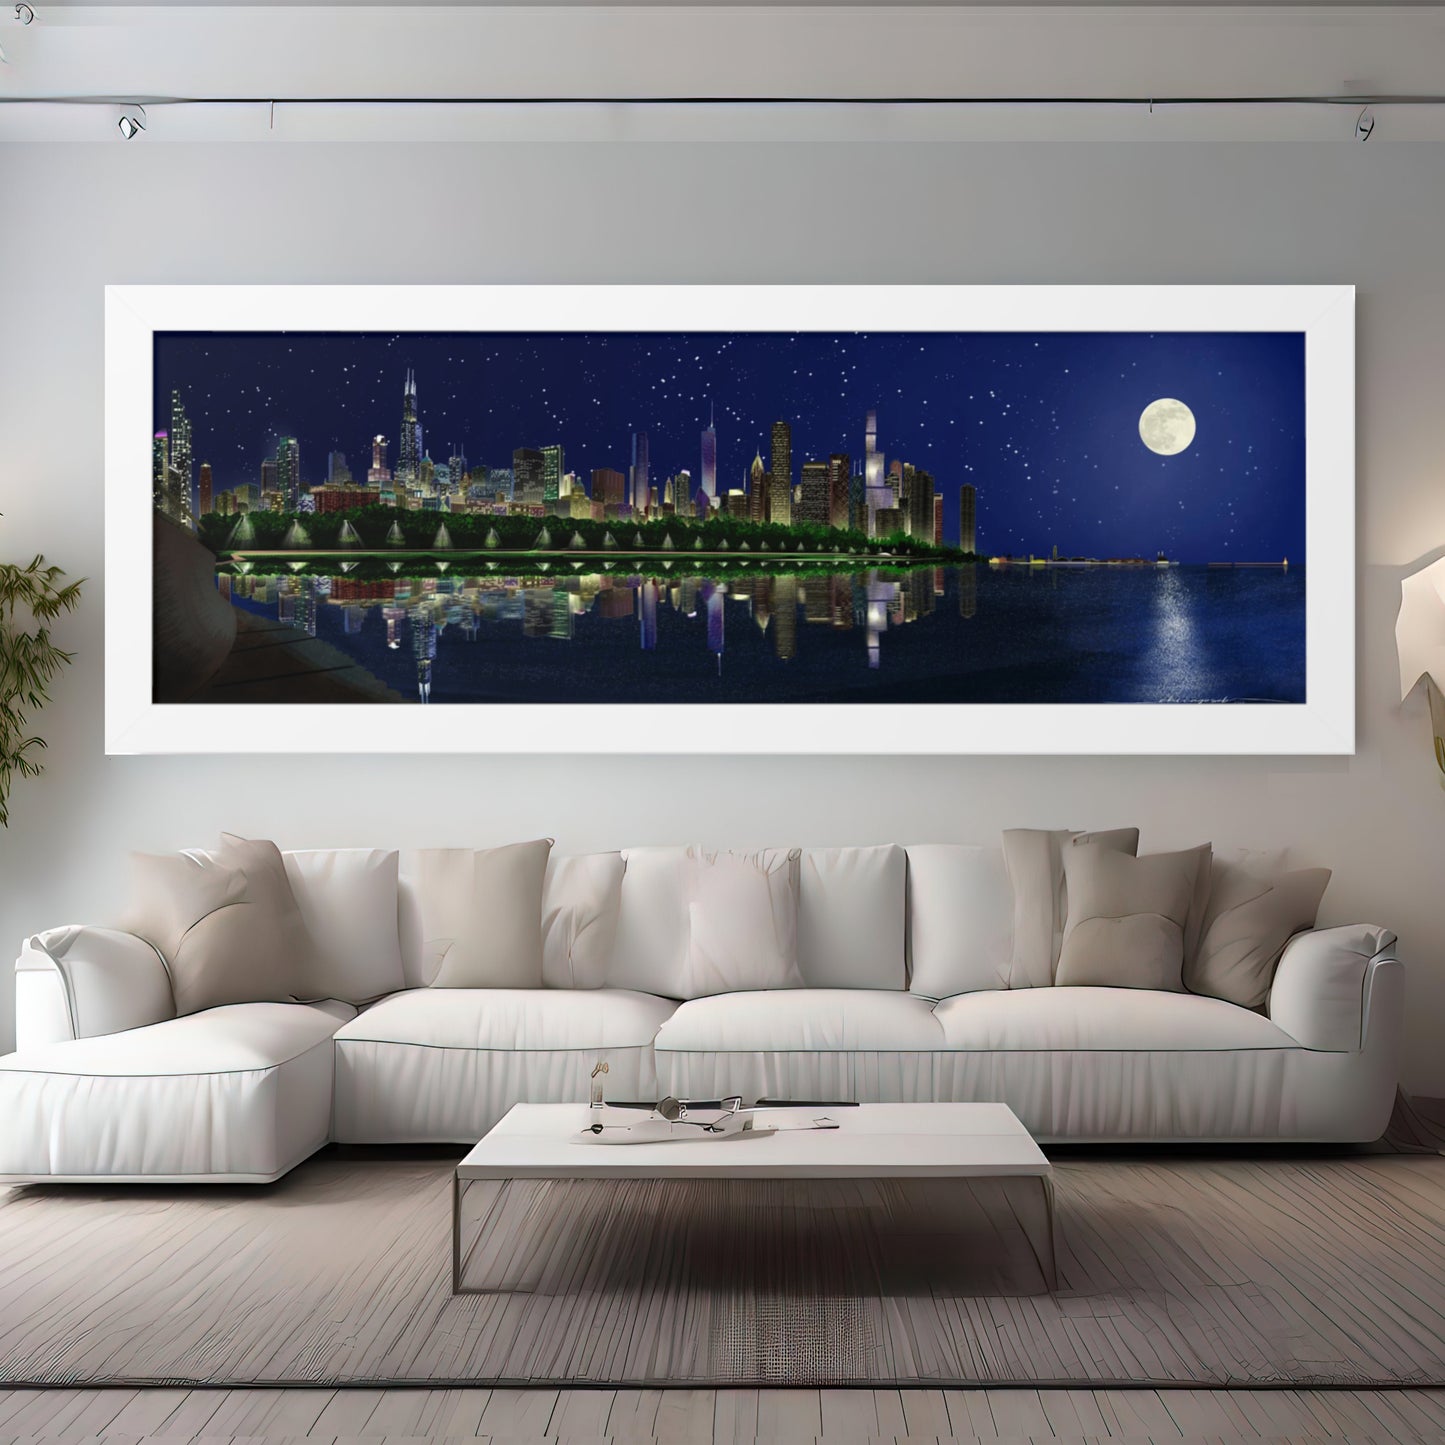 The essence of a Chicago summer night. Featuring a digital illustration of the iconic skyline, this framed print showcases a stunning panorama stretching from Shedd Aquarium to Navy Pier, where the large full moon above shines over the glowing city. Here it is framed in white.